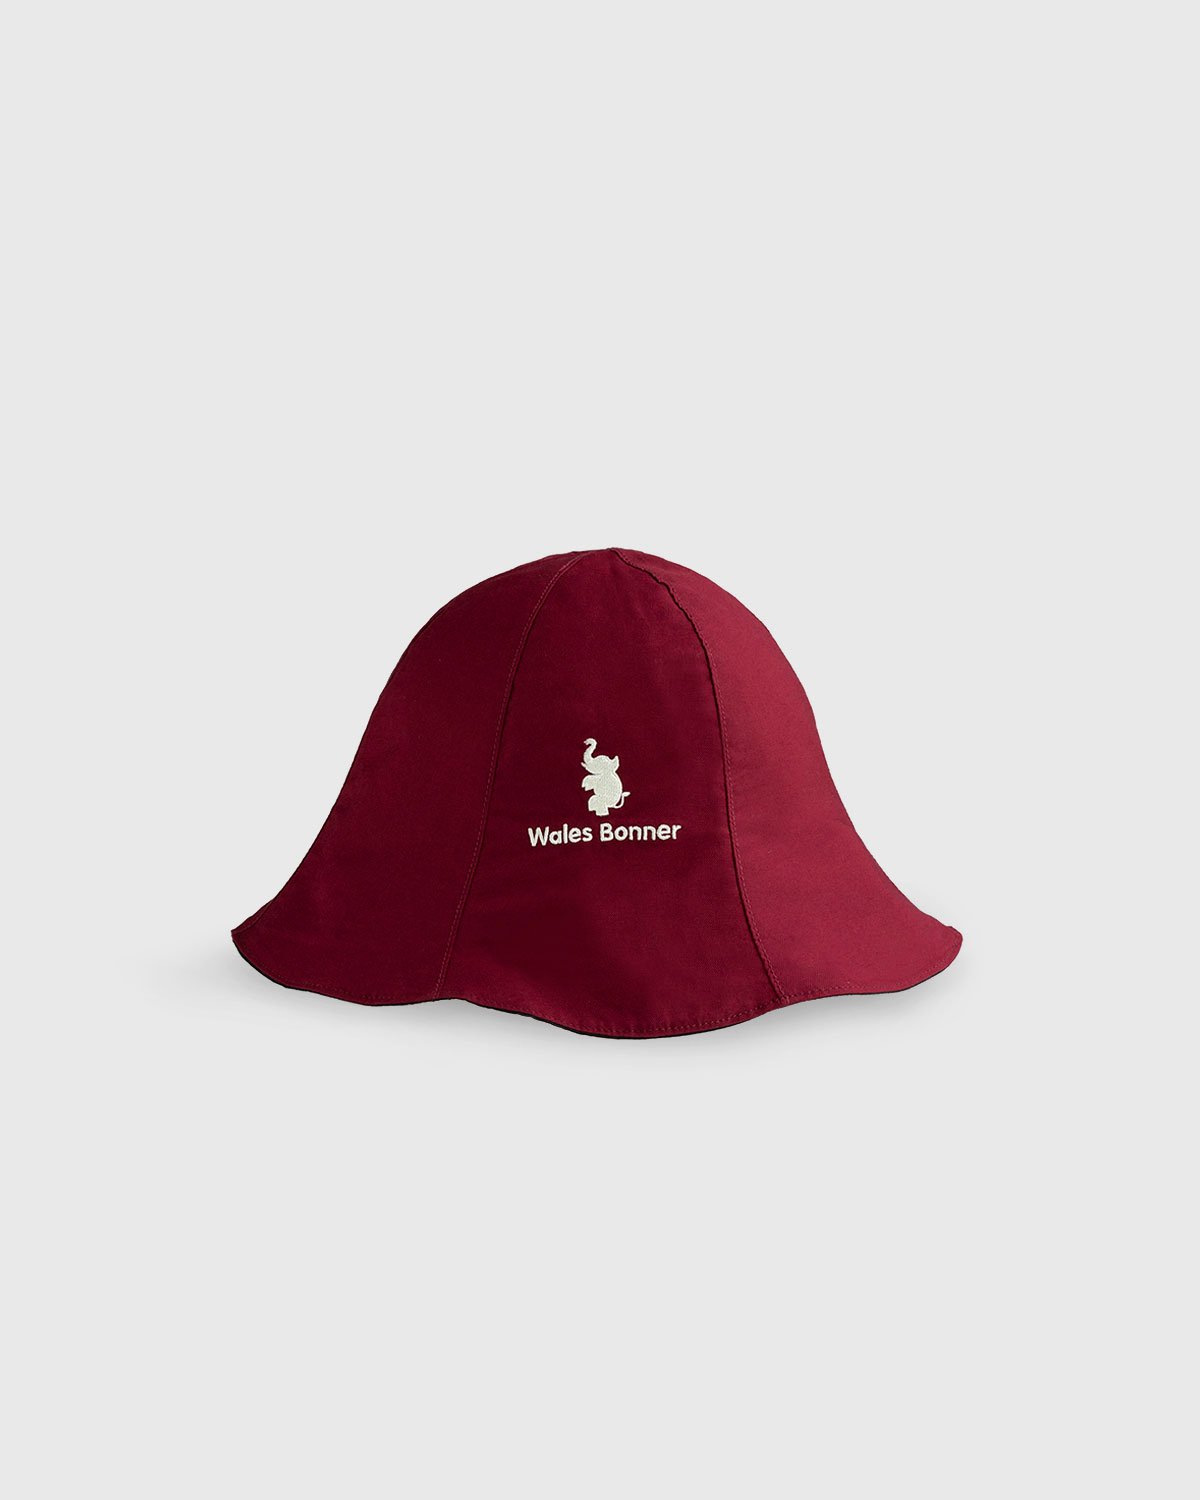 Adidas x Wales Bonner - Sunhat Black Burgundy - Accessories - Red - Image 1